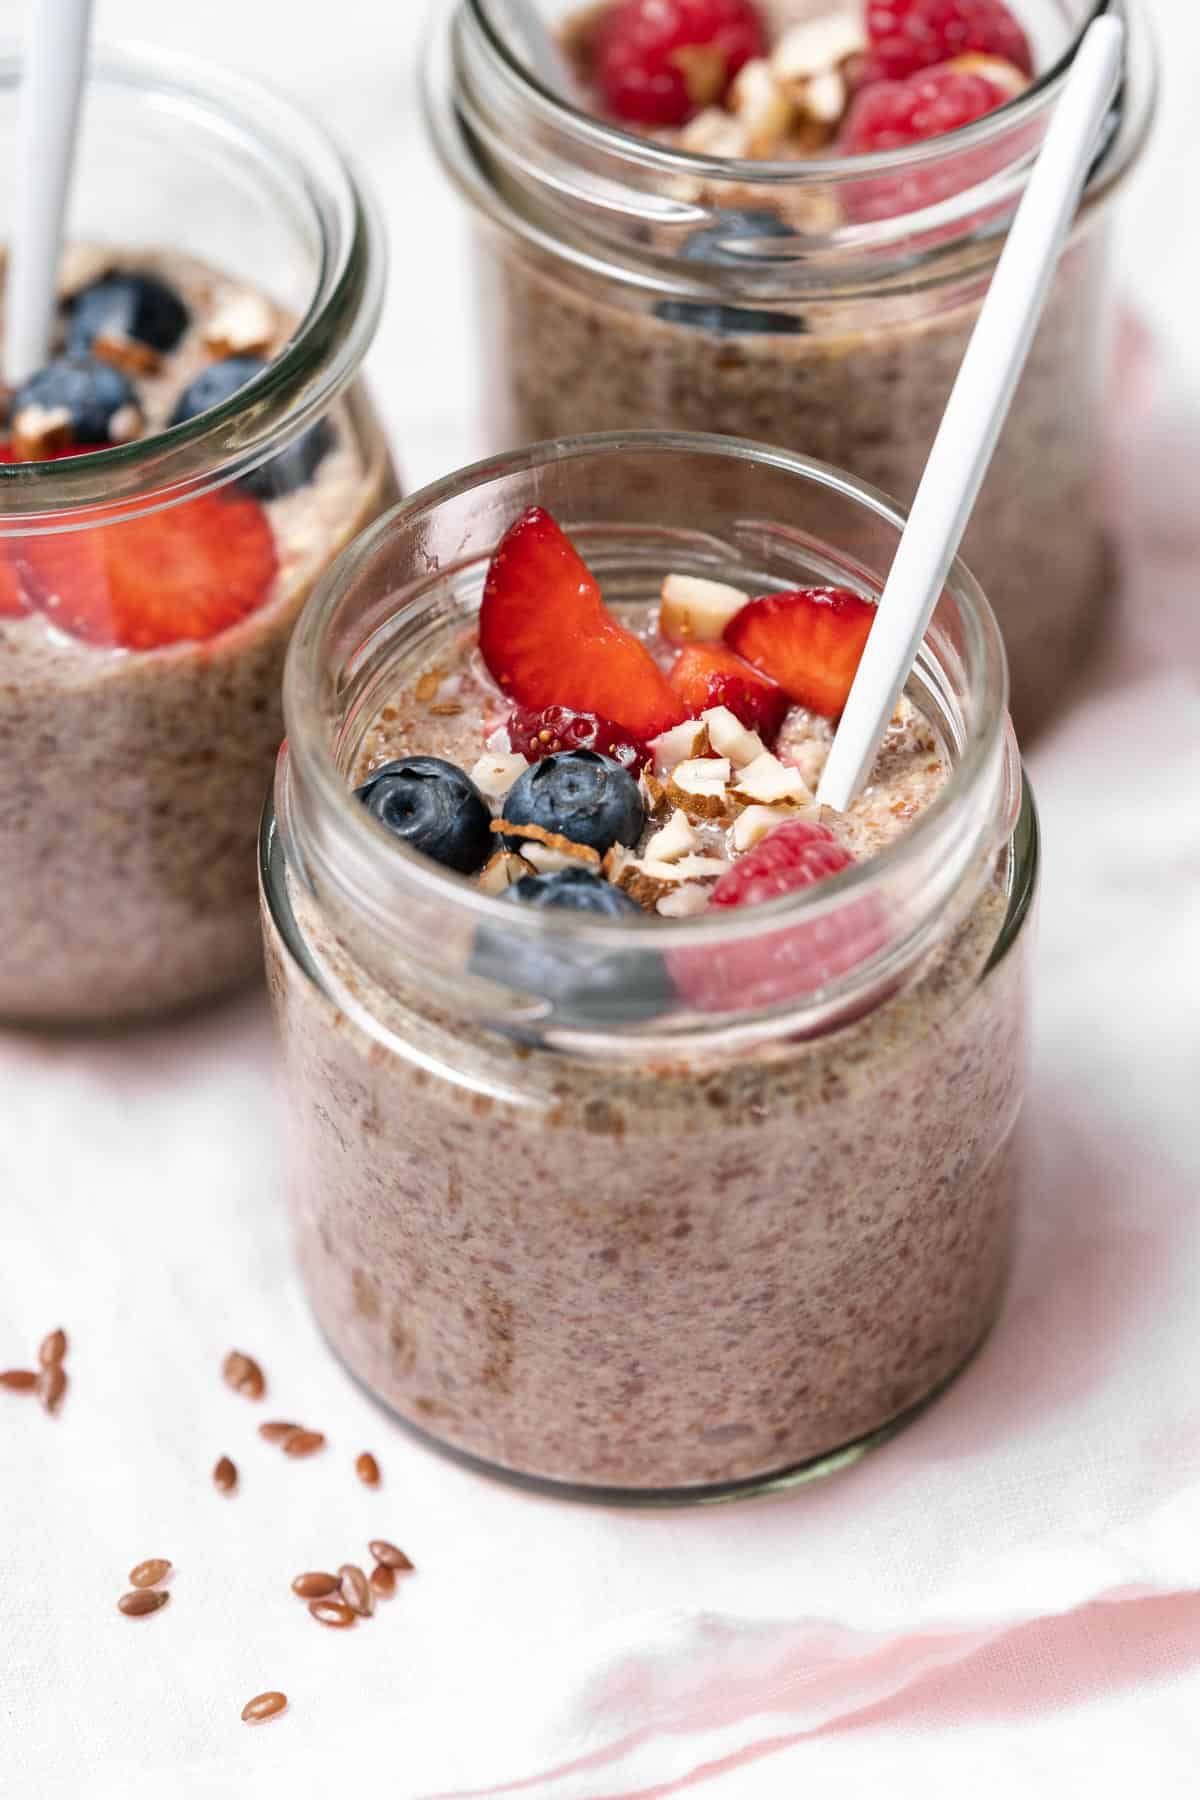 A close up view of a jar of flaxseed pudding with fruit and chopped almonds with a spoon inside.